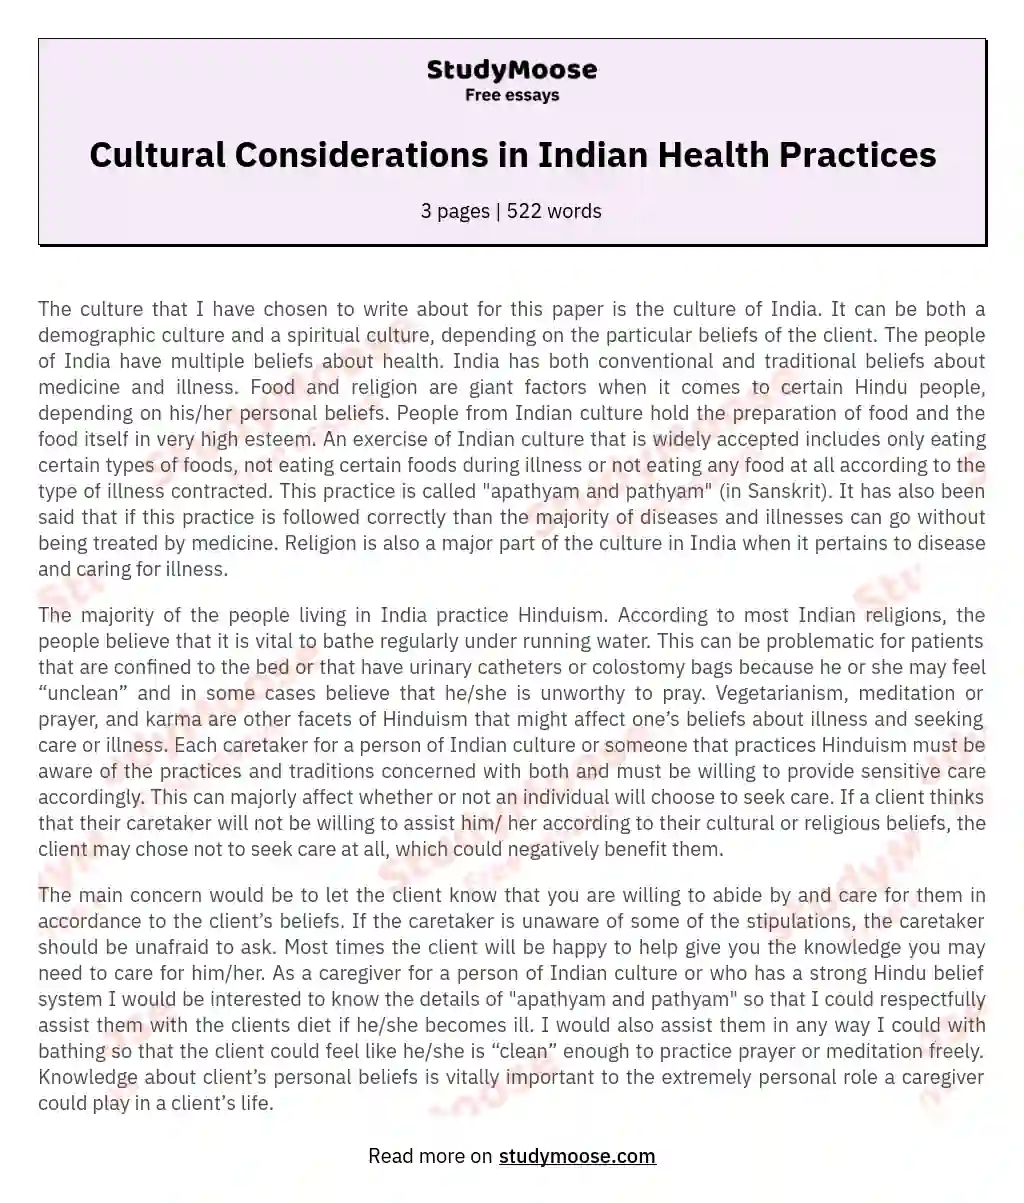 Cultural Considerations in Indian Health Practices essay